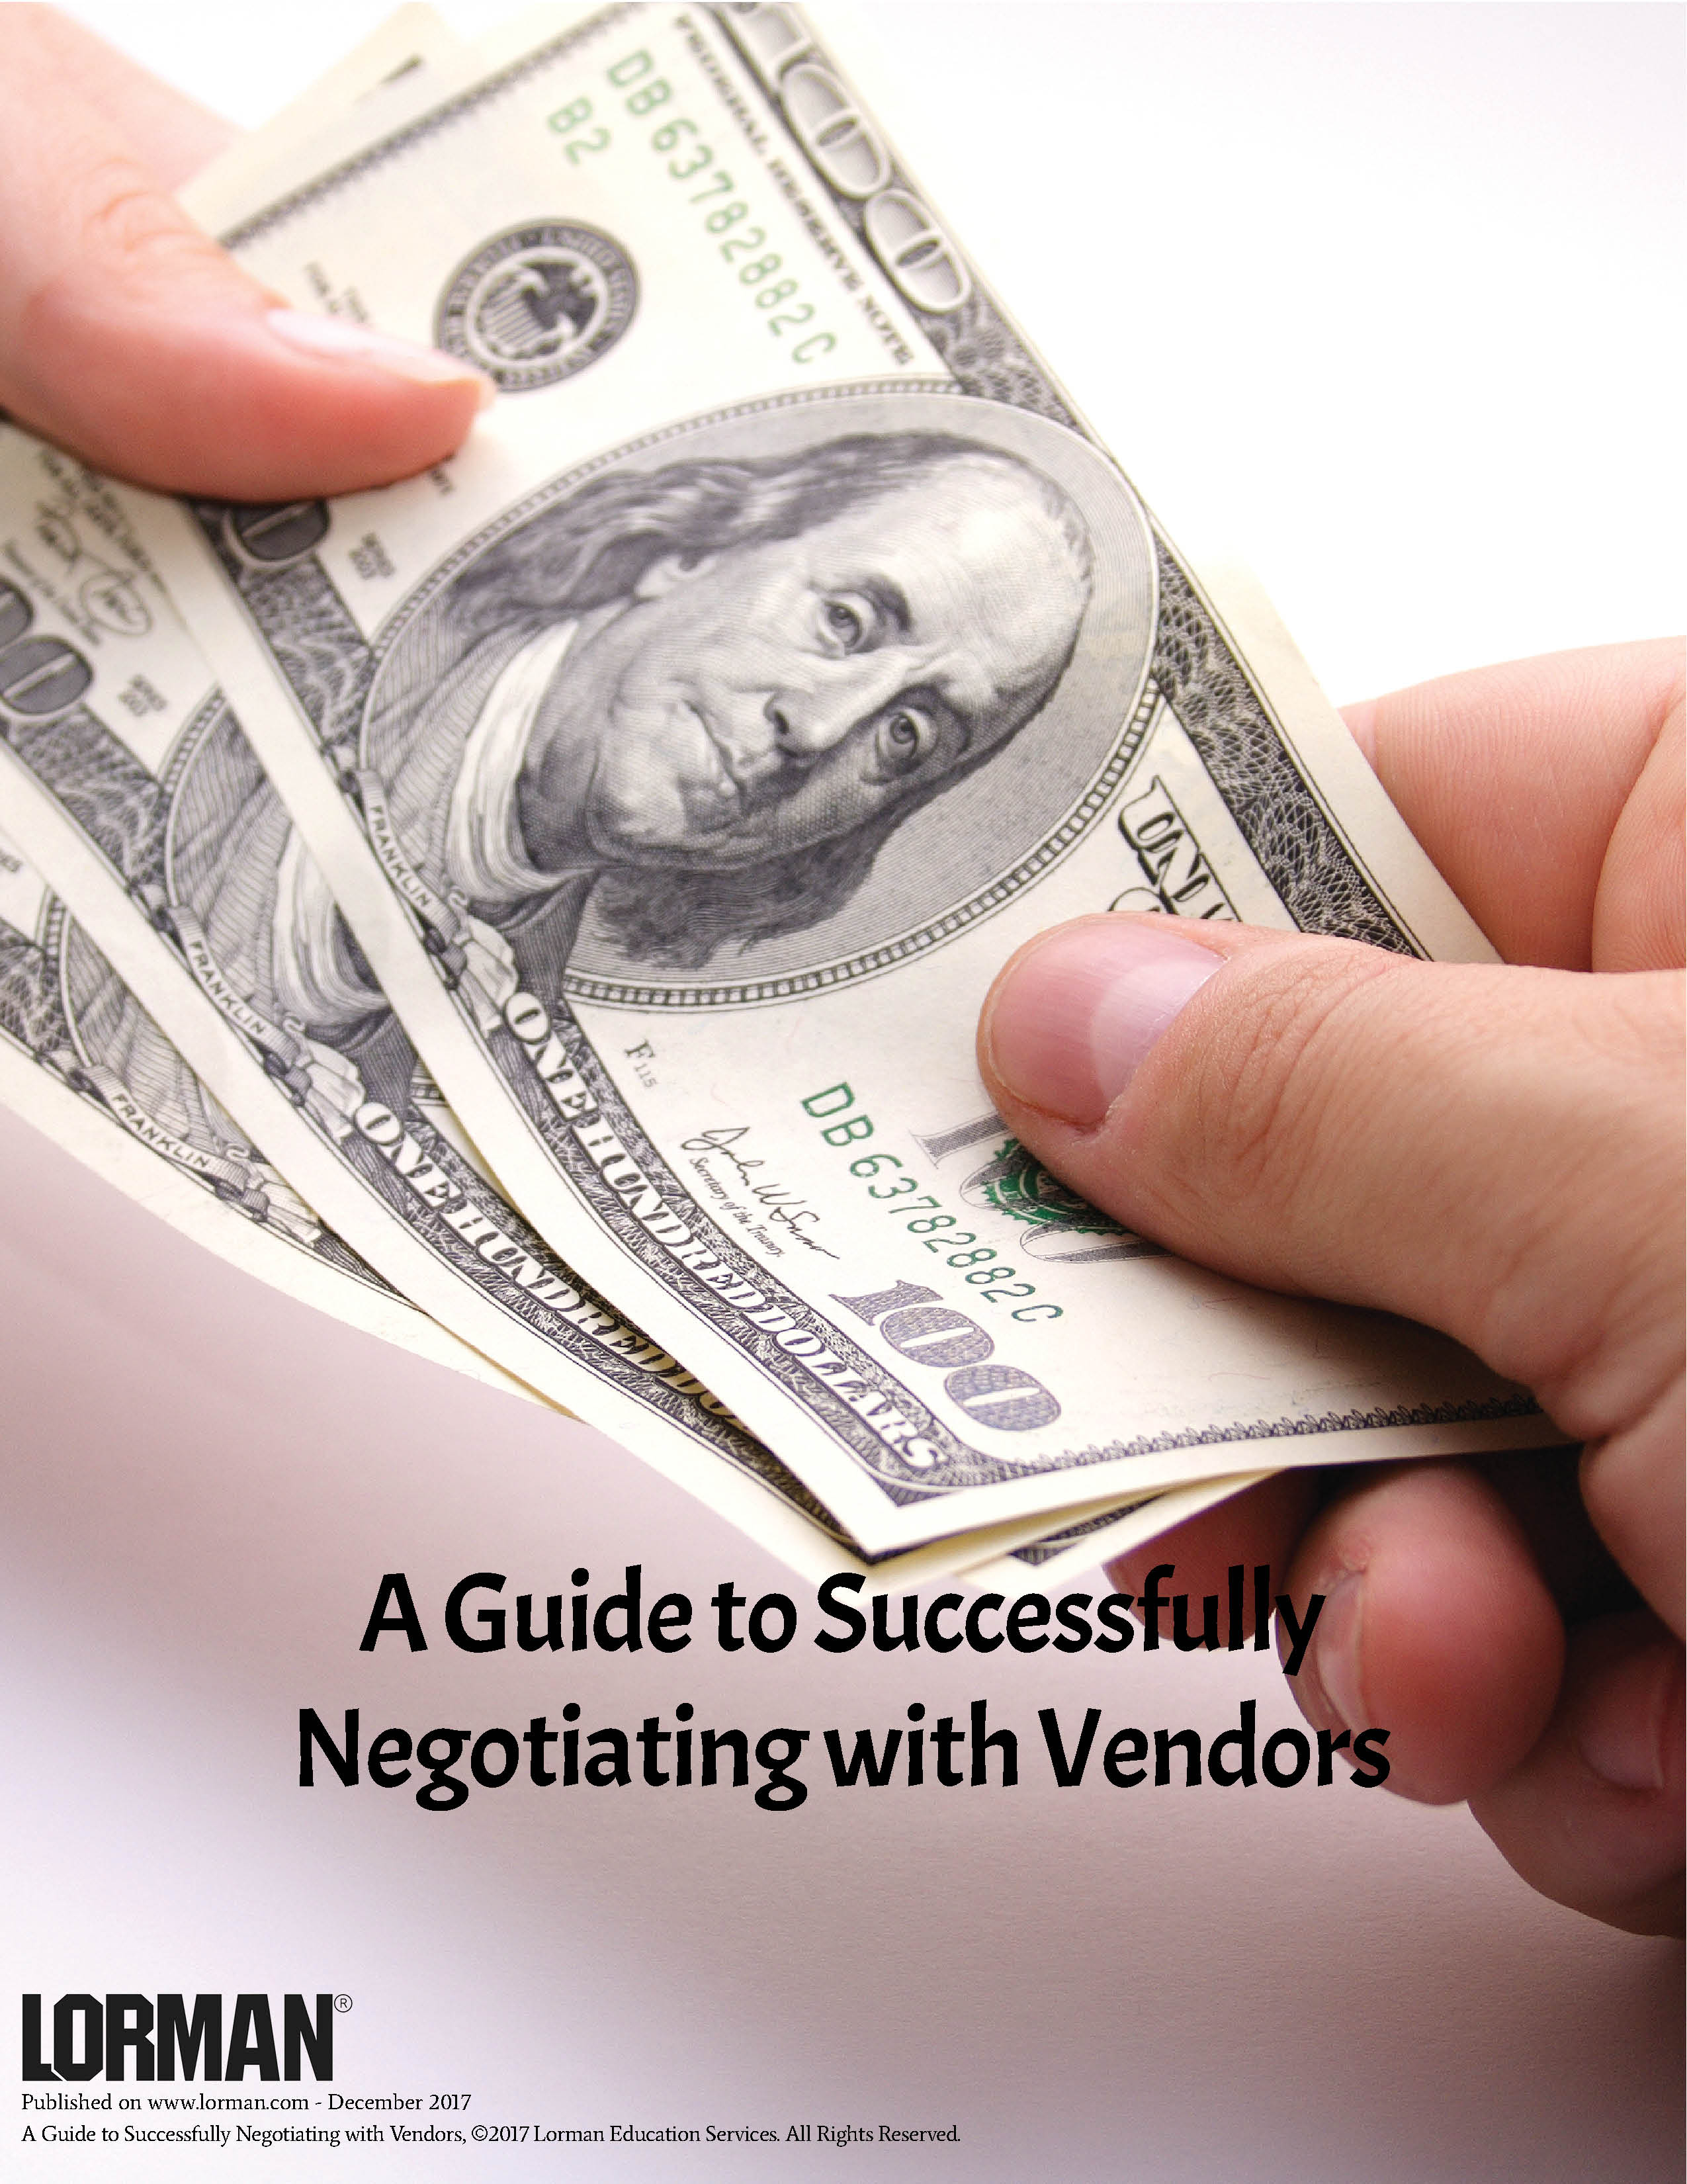 A Guide to Successfully Negotiating with Vendors